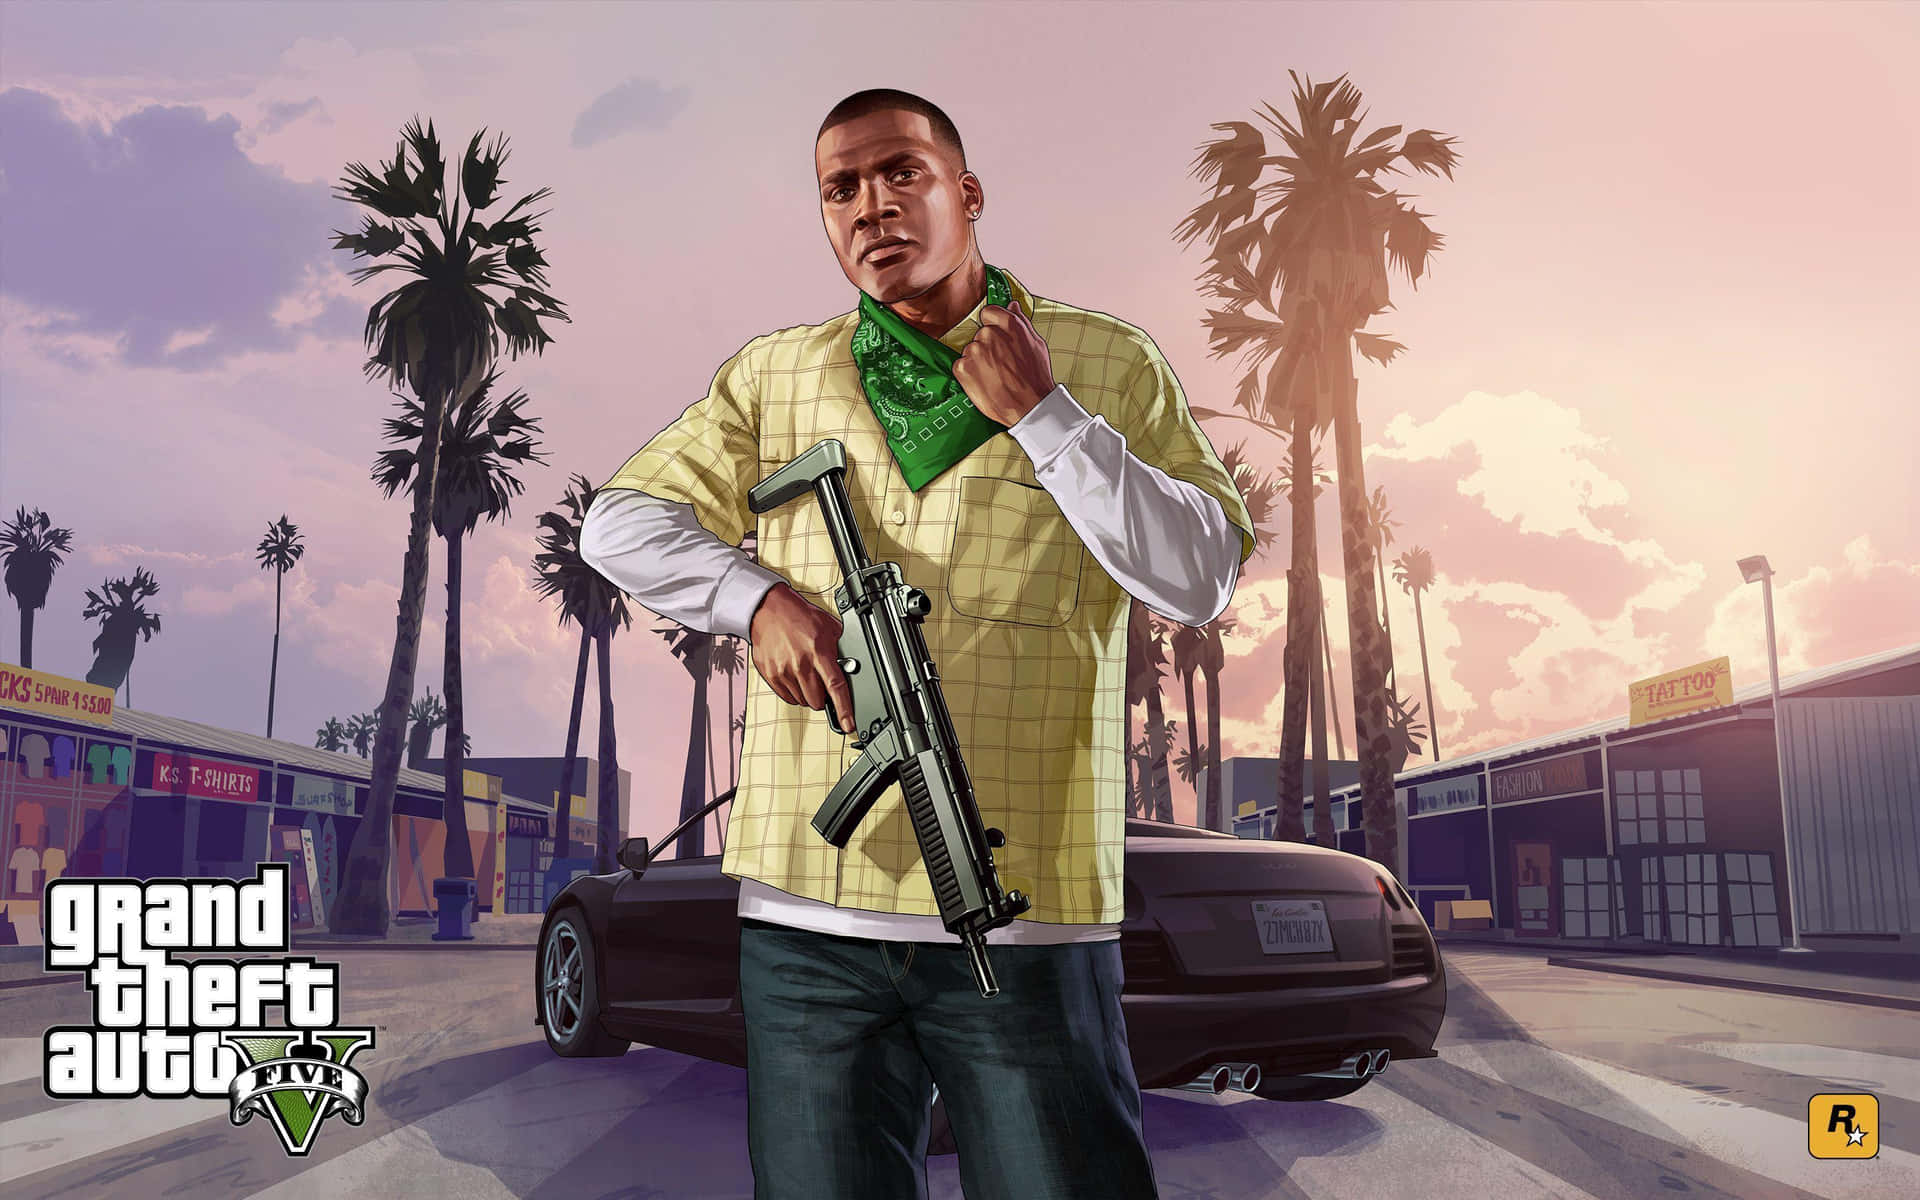 Explore Los Santos and its surroundings with GTA 5!